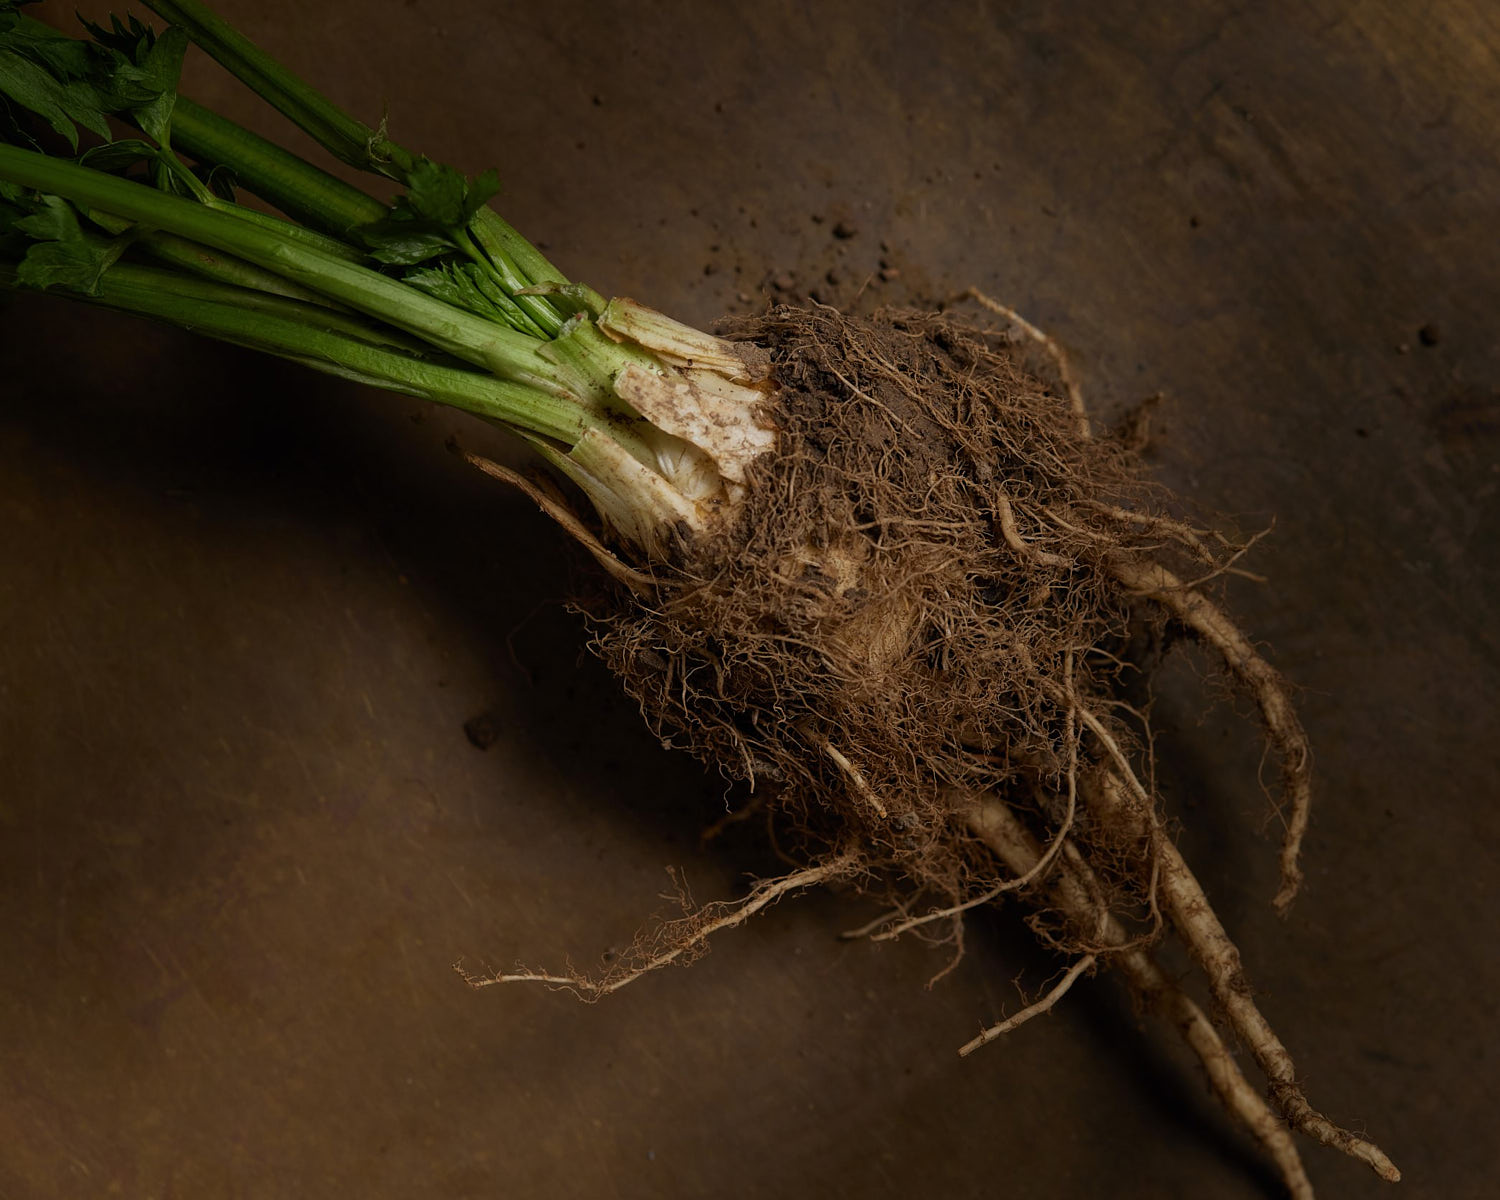 Rough photo of a celery root with soil and roots attached